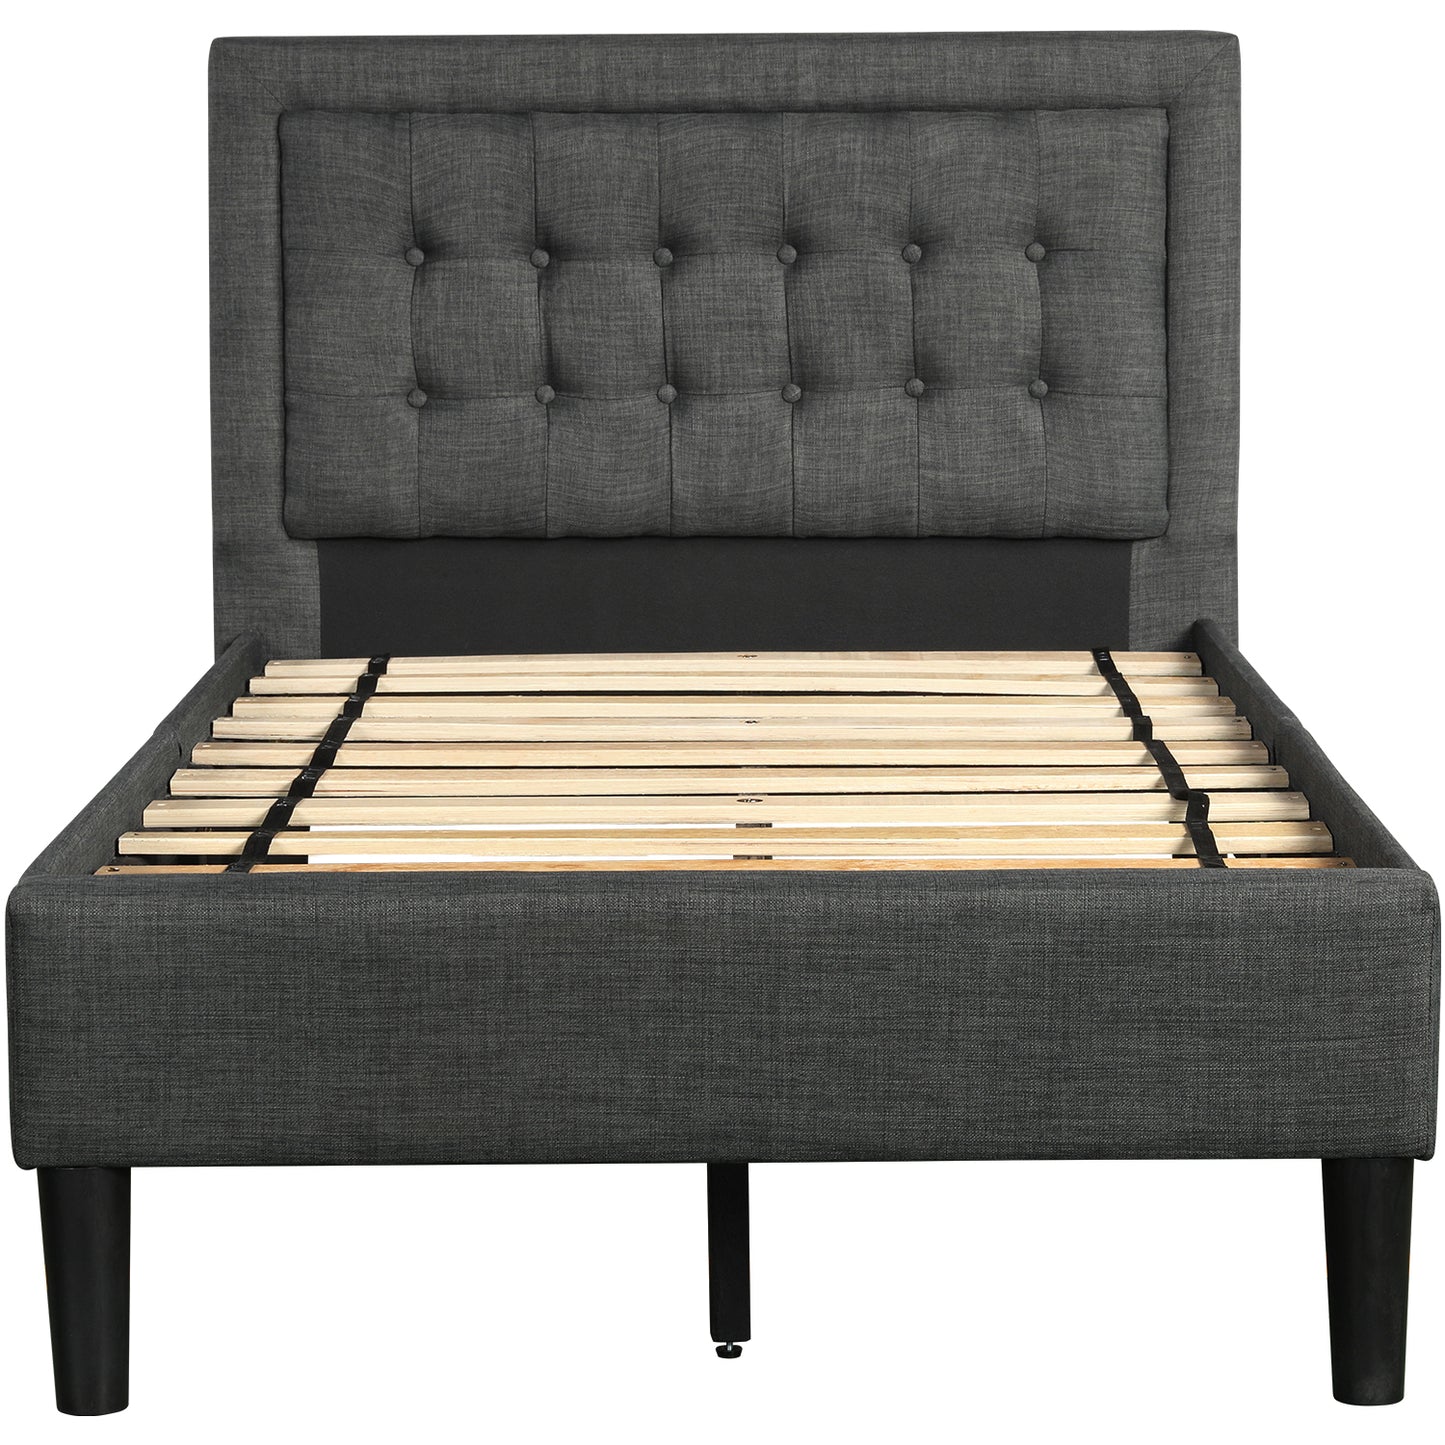 SYNGAR Gray Fabric Upholstered Platform Bed Frame Twin Size with Button Tufted Headboard, Wood Frame Mattress Foundation with Strong Wooden Slat Support, No Box Spring Needed, Easy Assembly